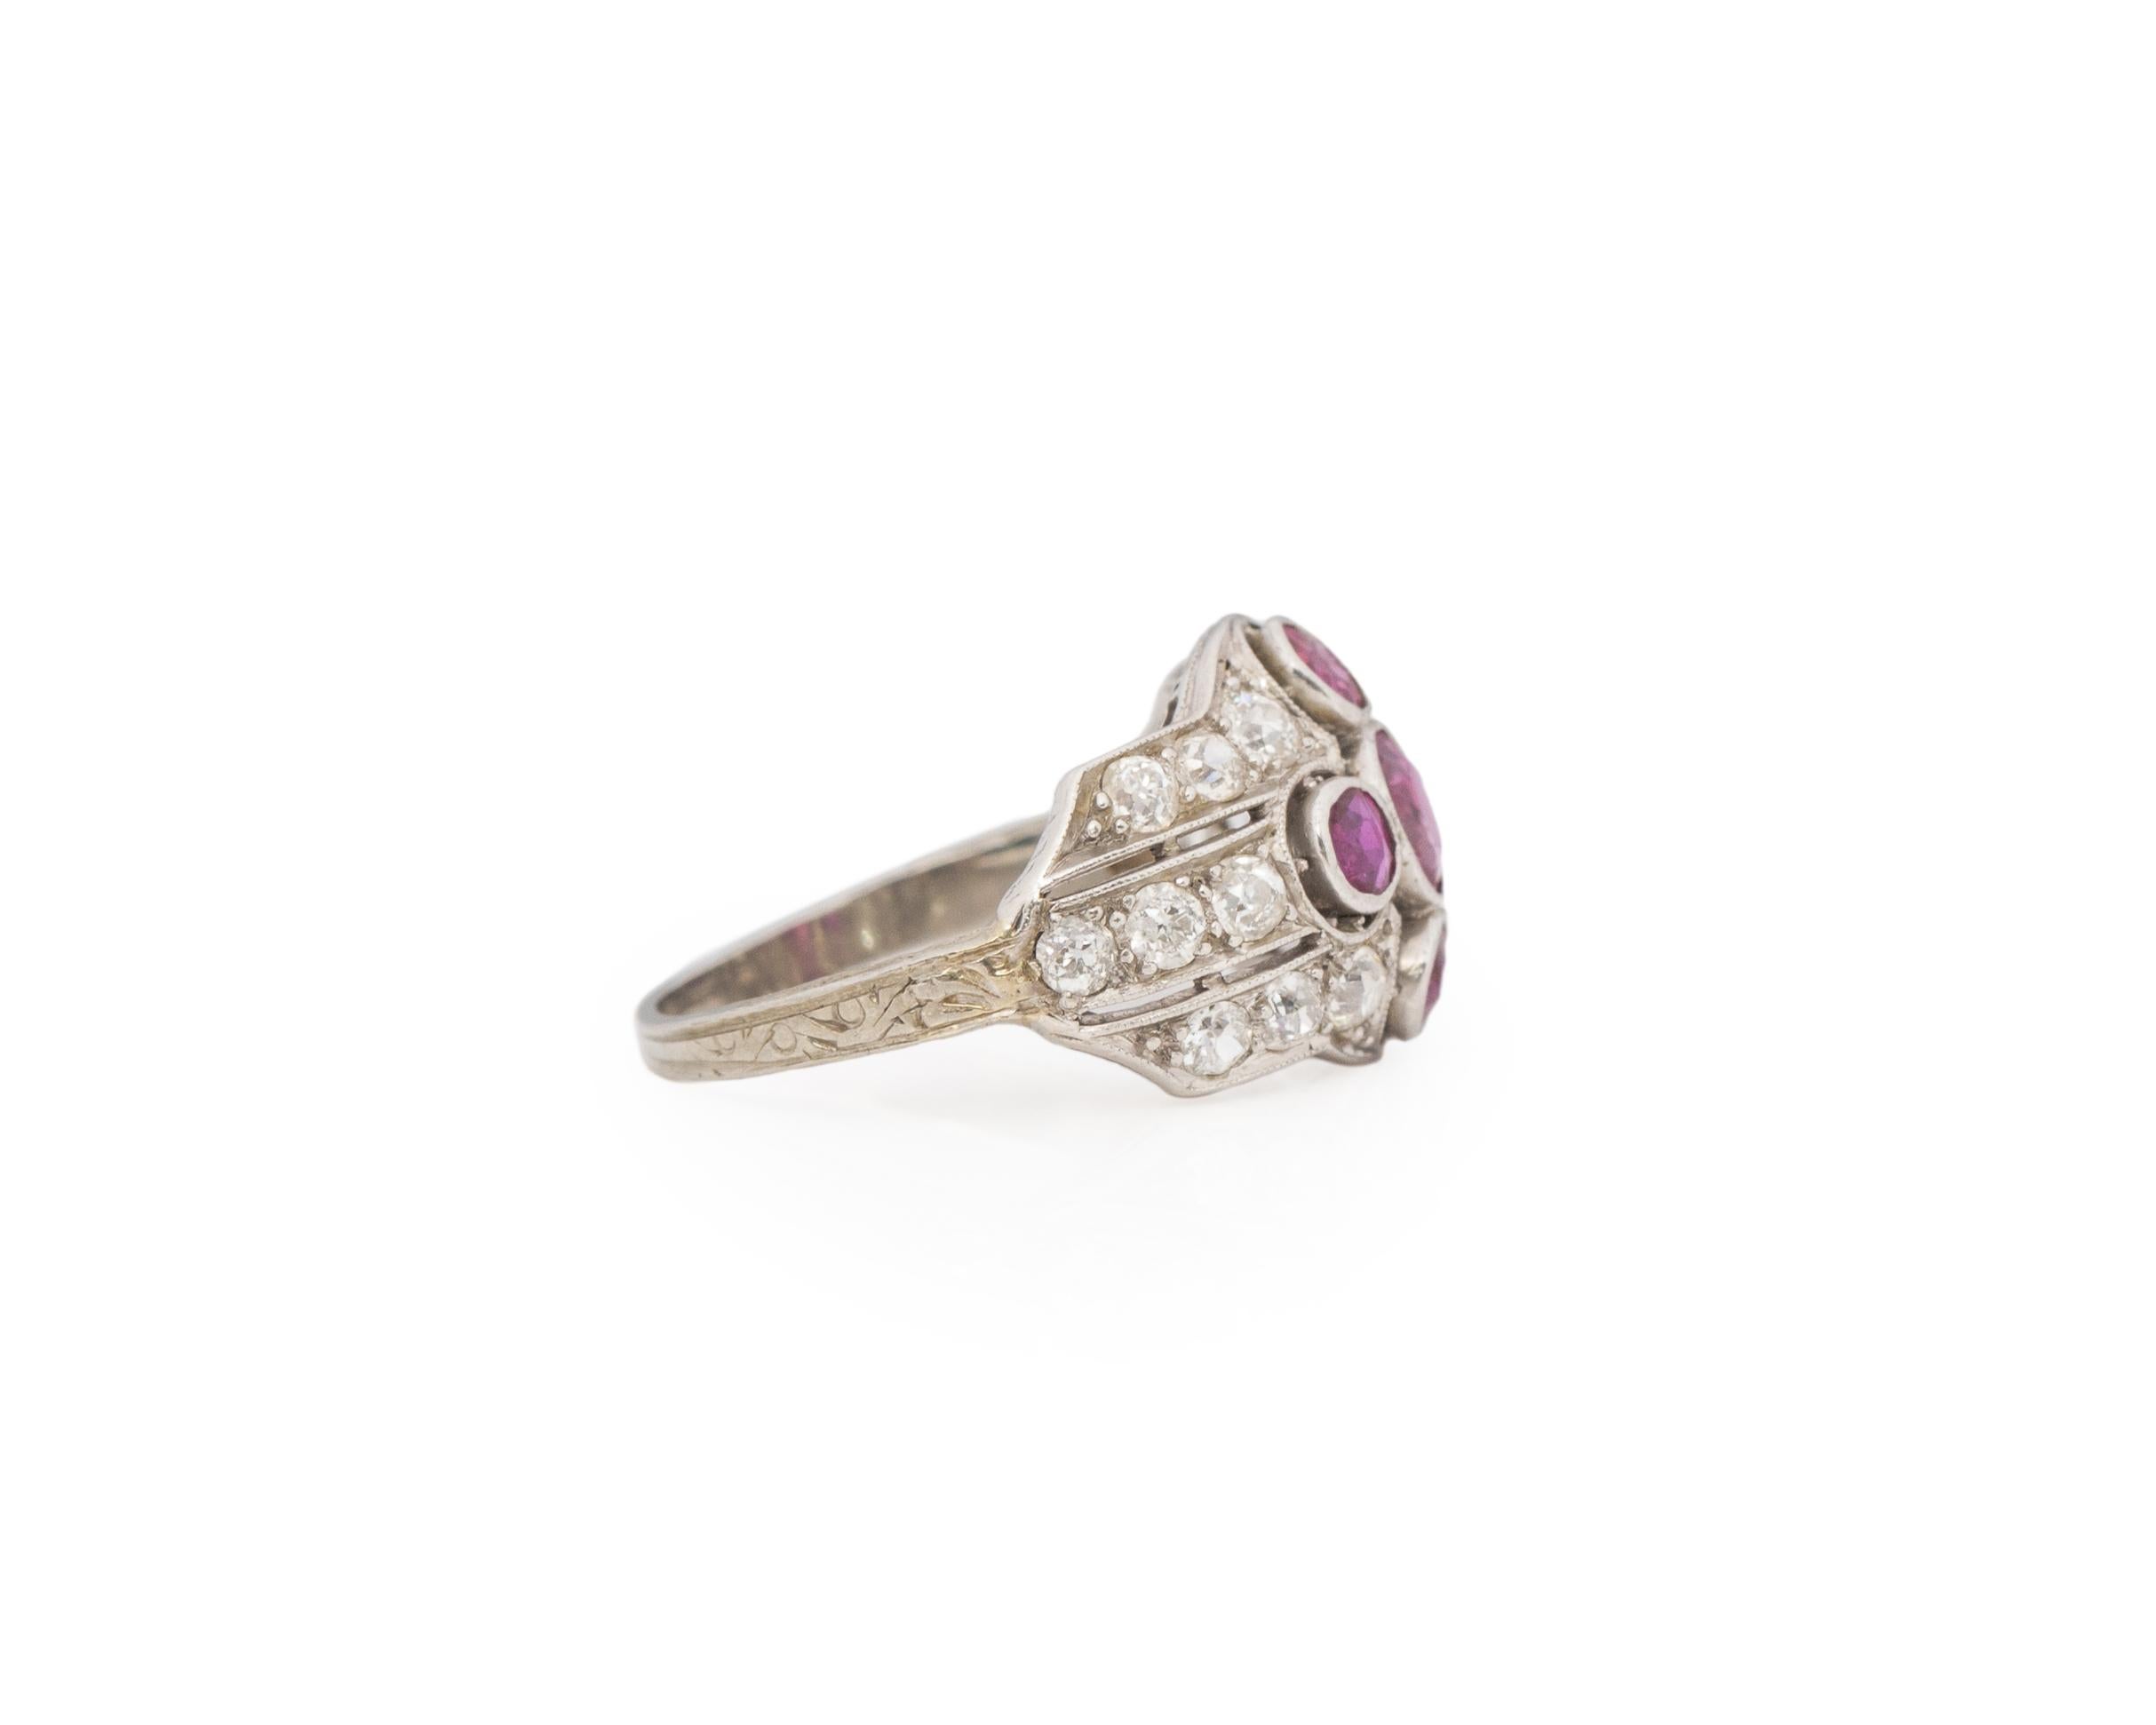 Ring Size: 5.25
Metal Type: Platinum [Hallmarked, and Tested]
Weight: 4.1grams

Ruby Details:
Weight: .90ct, total weight
Cut: Old Mine Brilliant
Color: Intense Pink-Red
Clarity: VS

Side Diamond Details:
Weight: .90ct, total
Cut: Old European